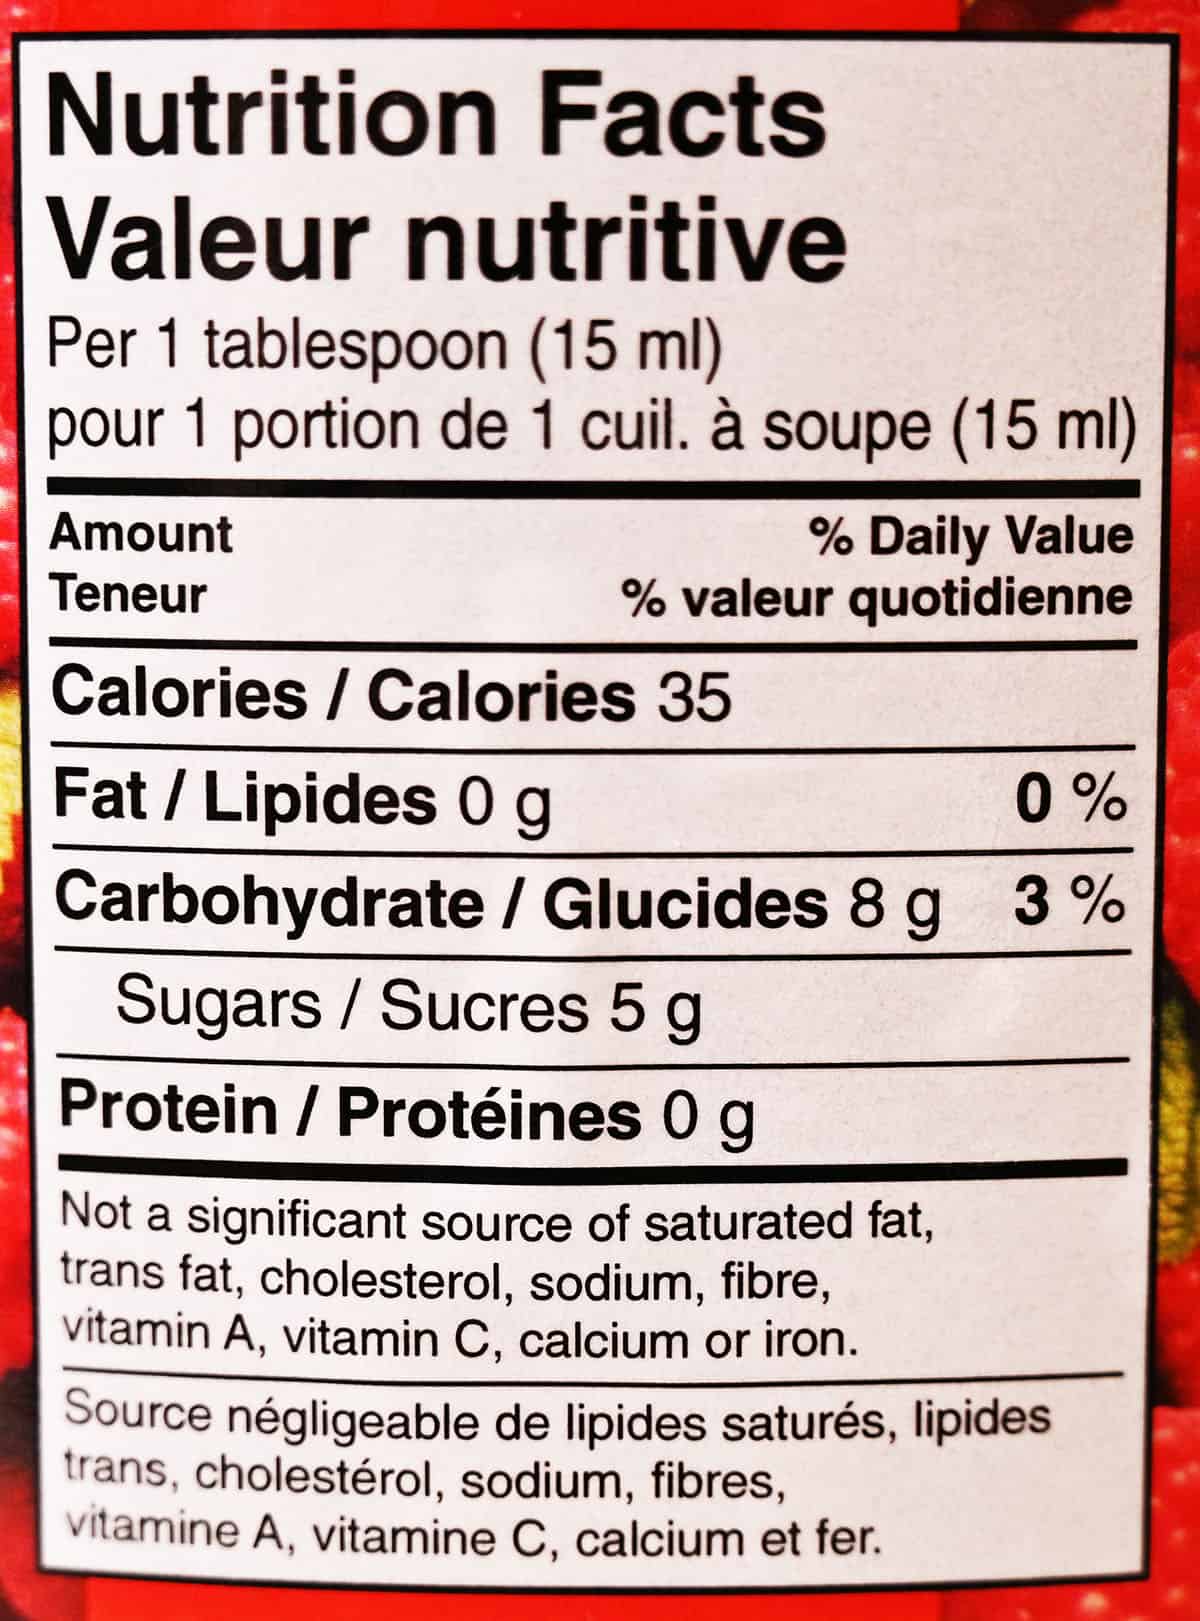 Jam nutrition facts from label on jar.